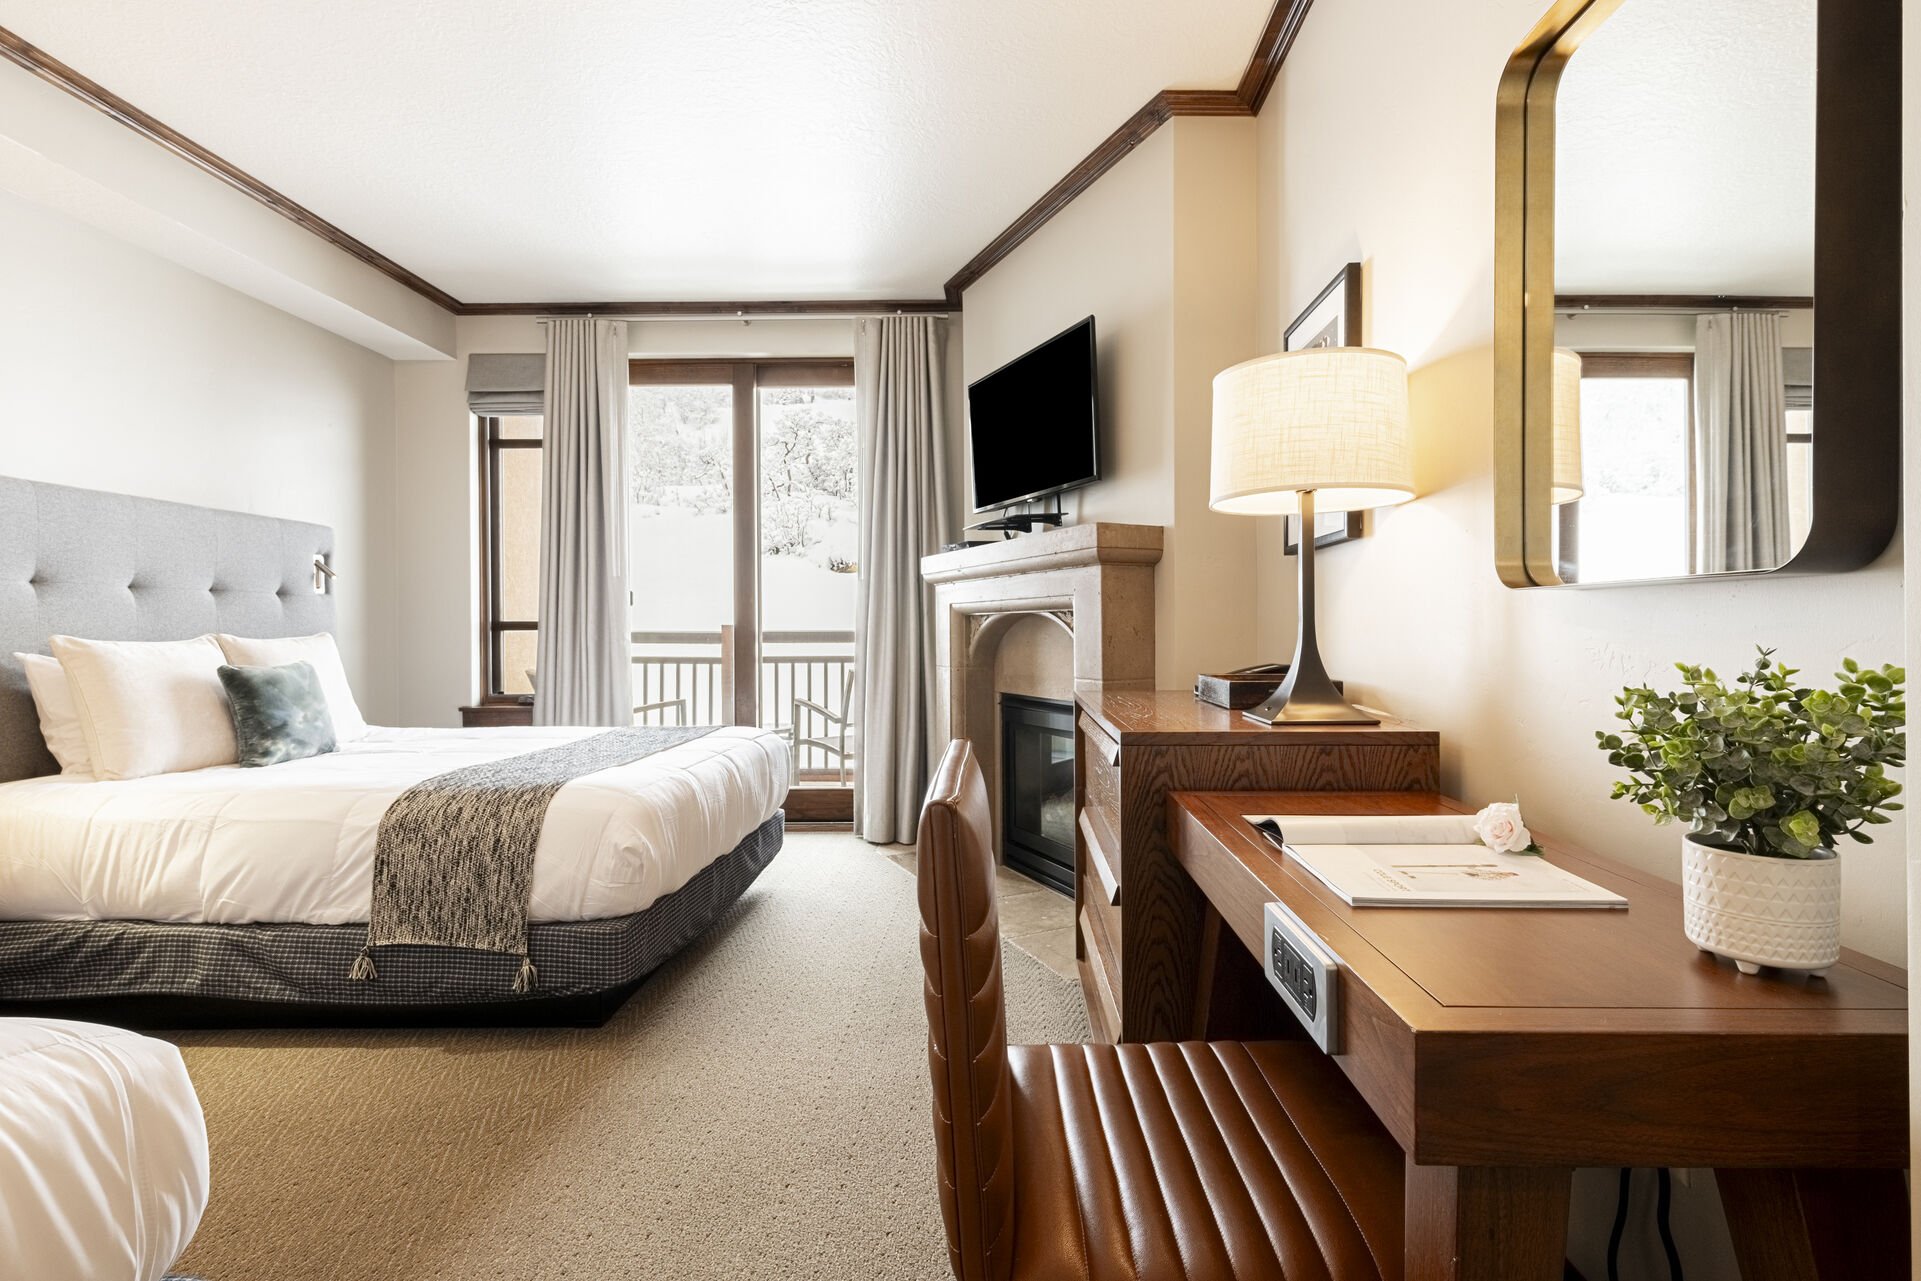 Guest Suite 4 (Unit C) with two queen beds, a desk, and a private balcony